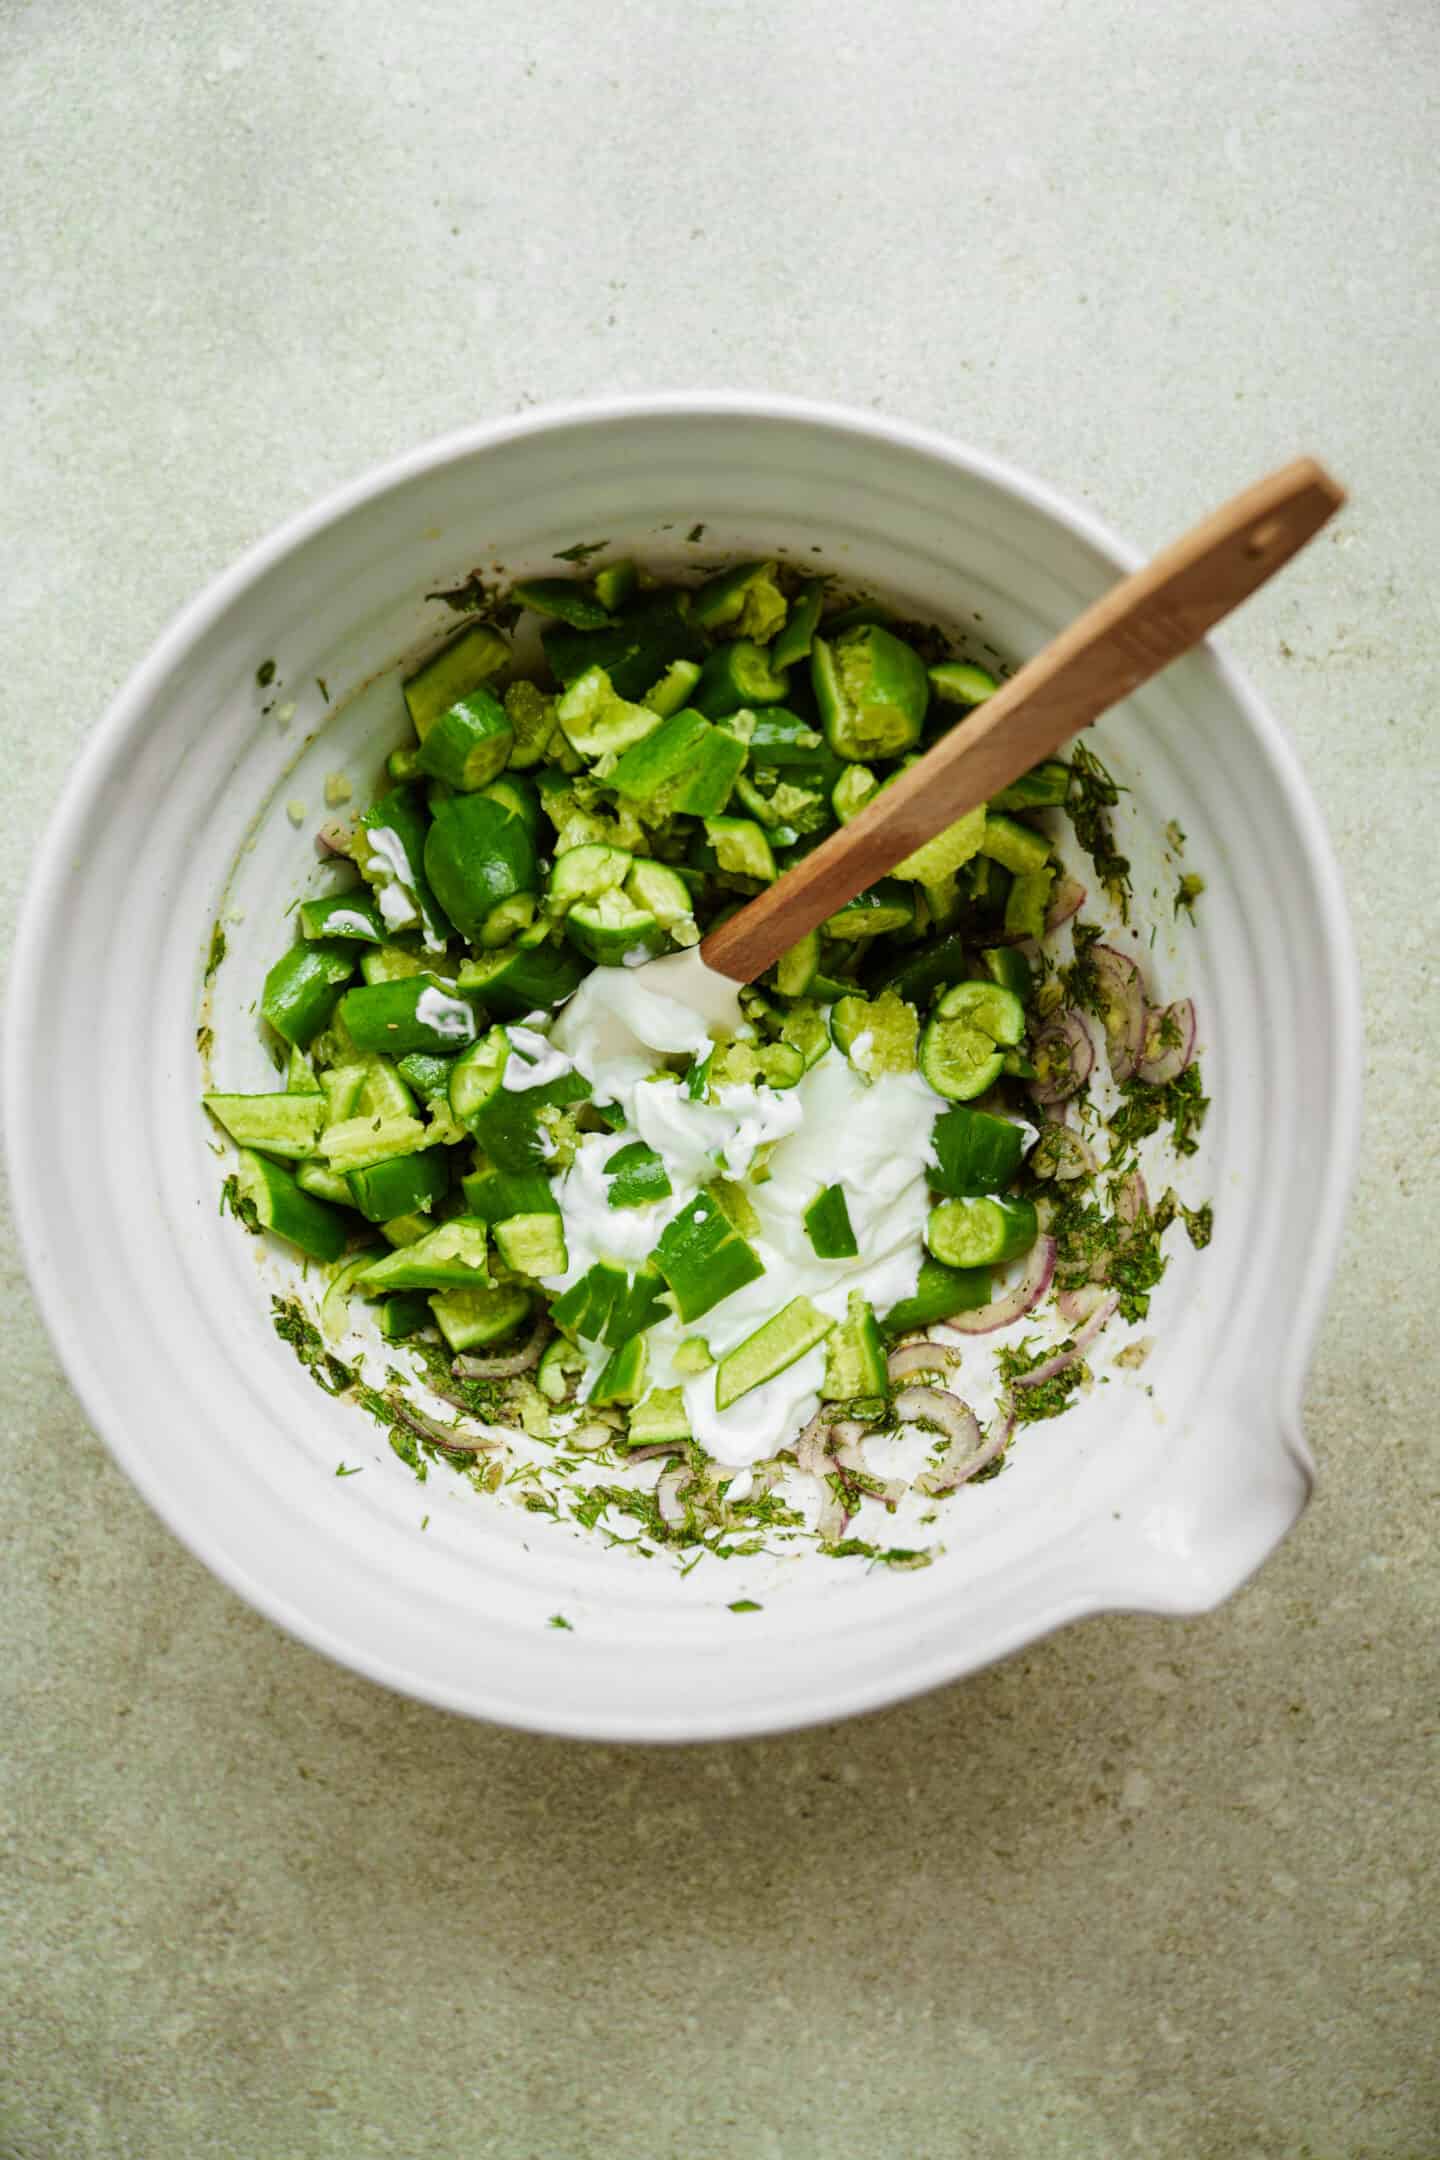 Mixing up creamy cucumber salad in a bowl